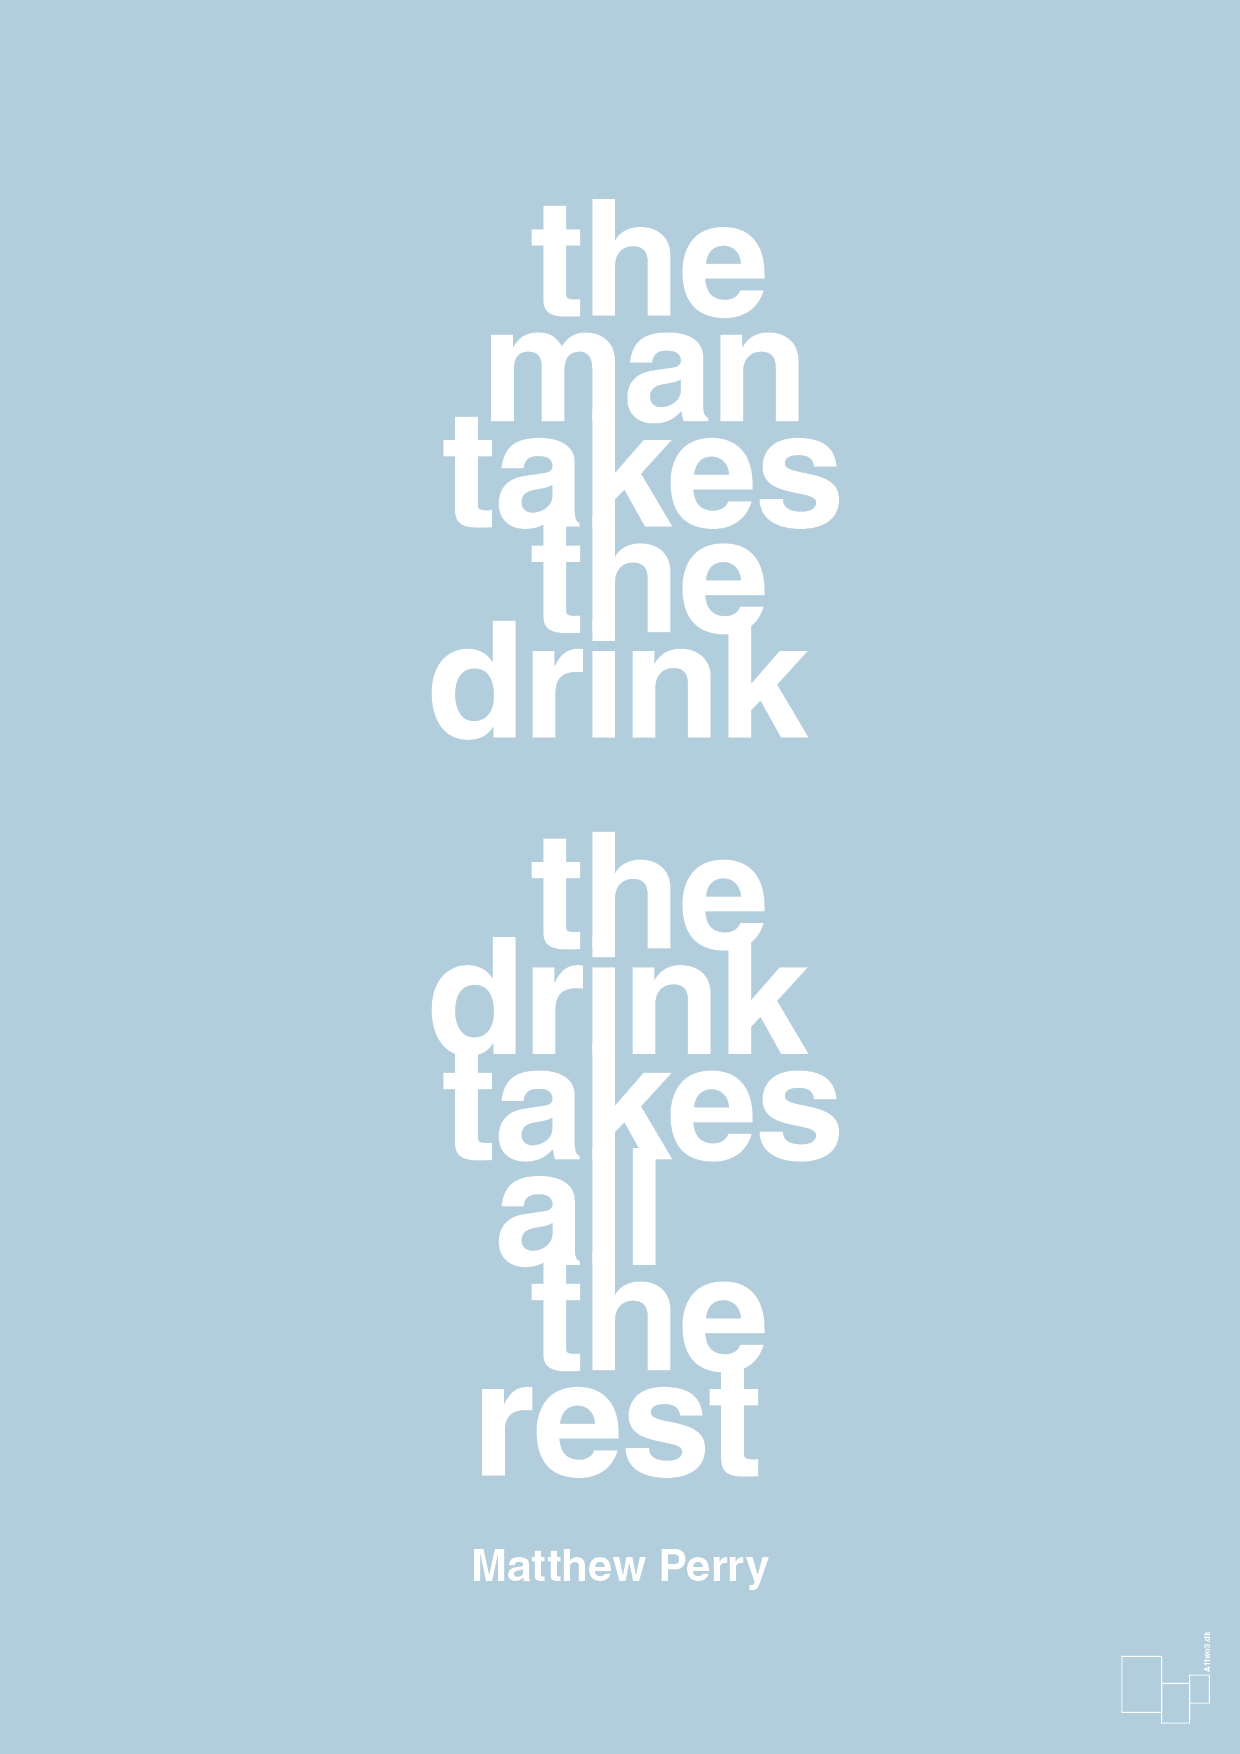 the man takes the drink the drink takes all the rest - Plakat med Citater i Heavenly Blue